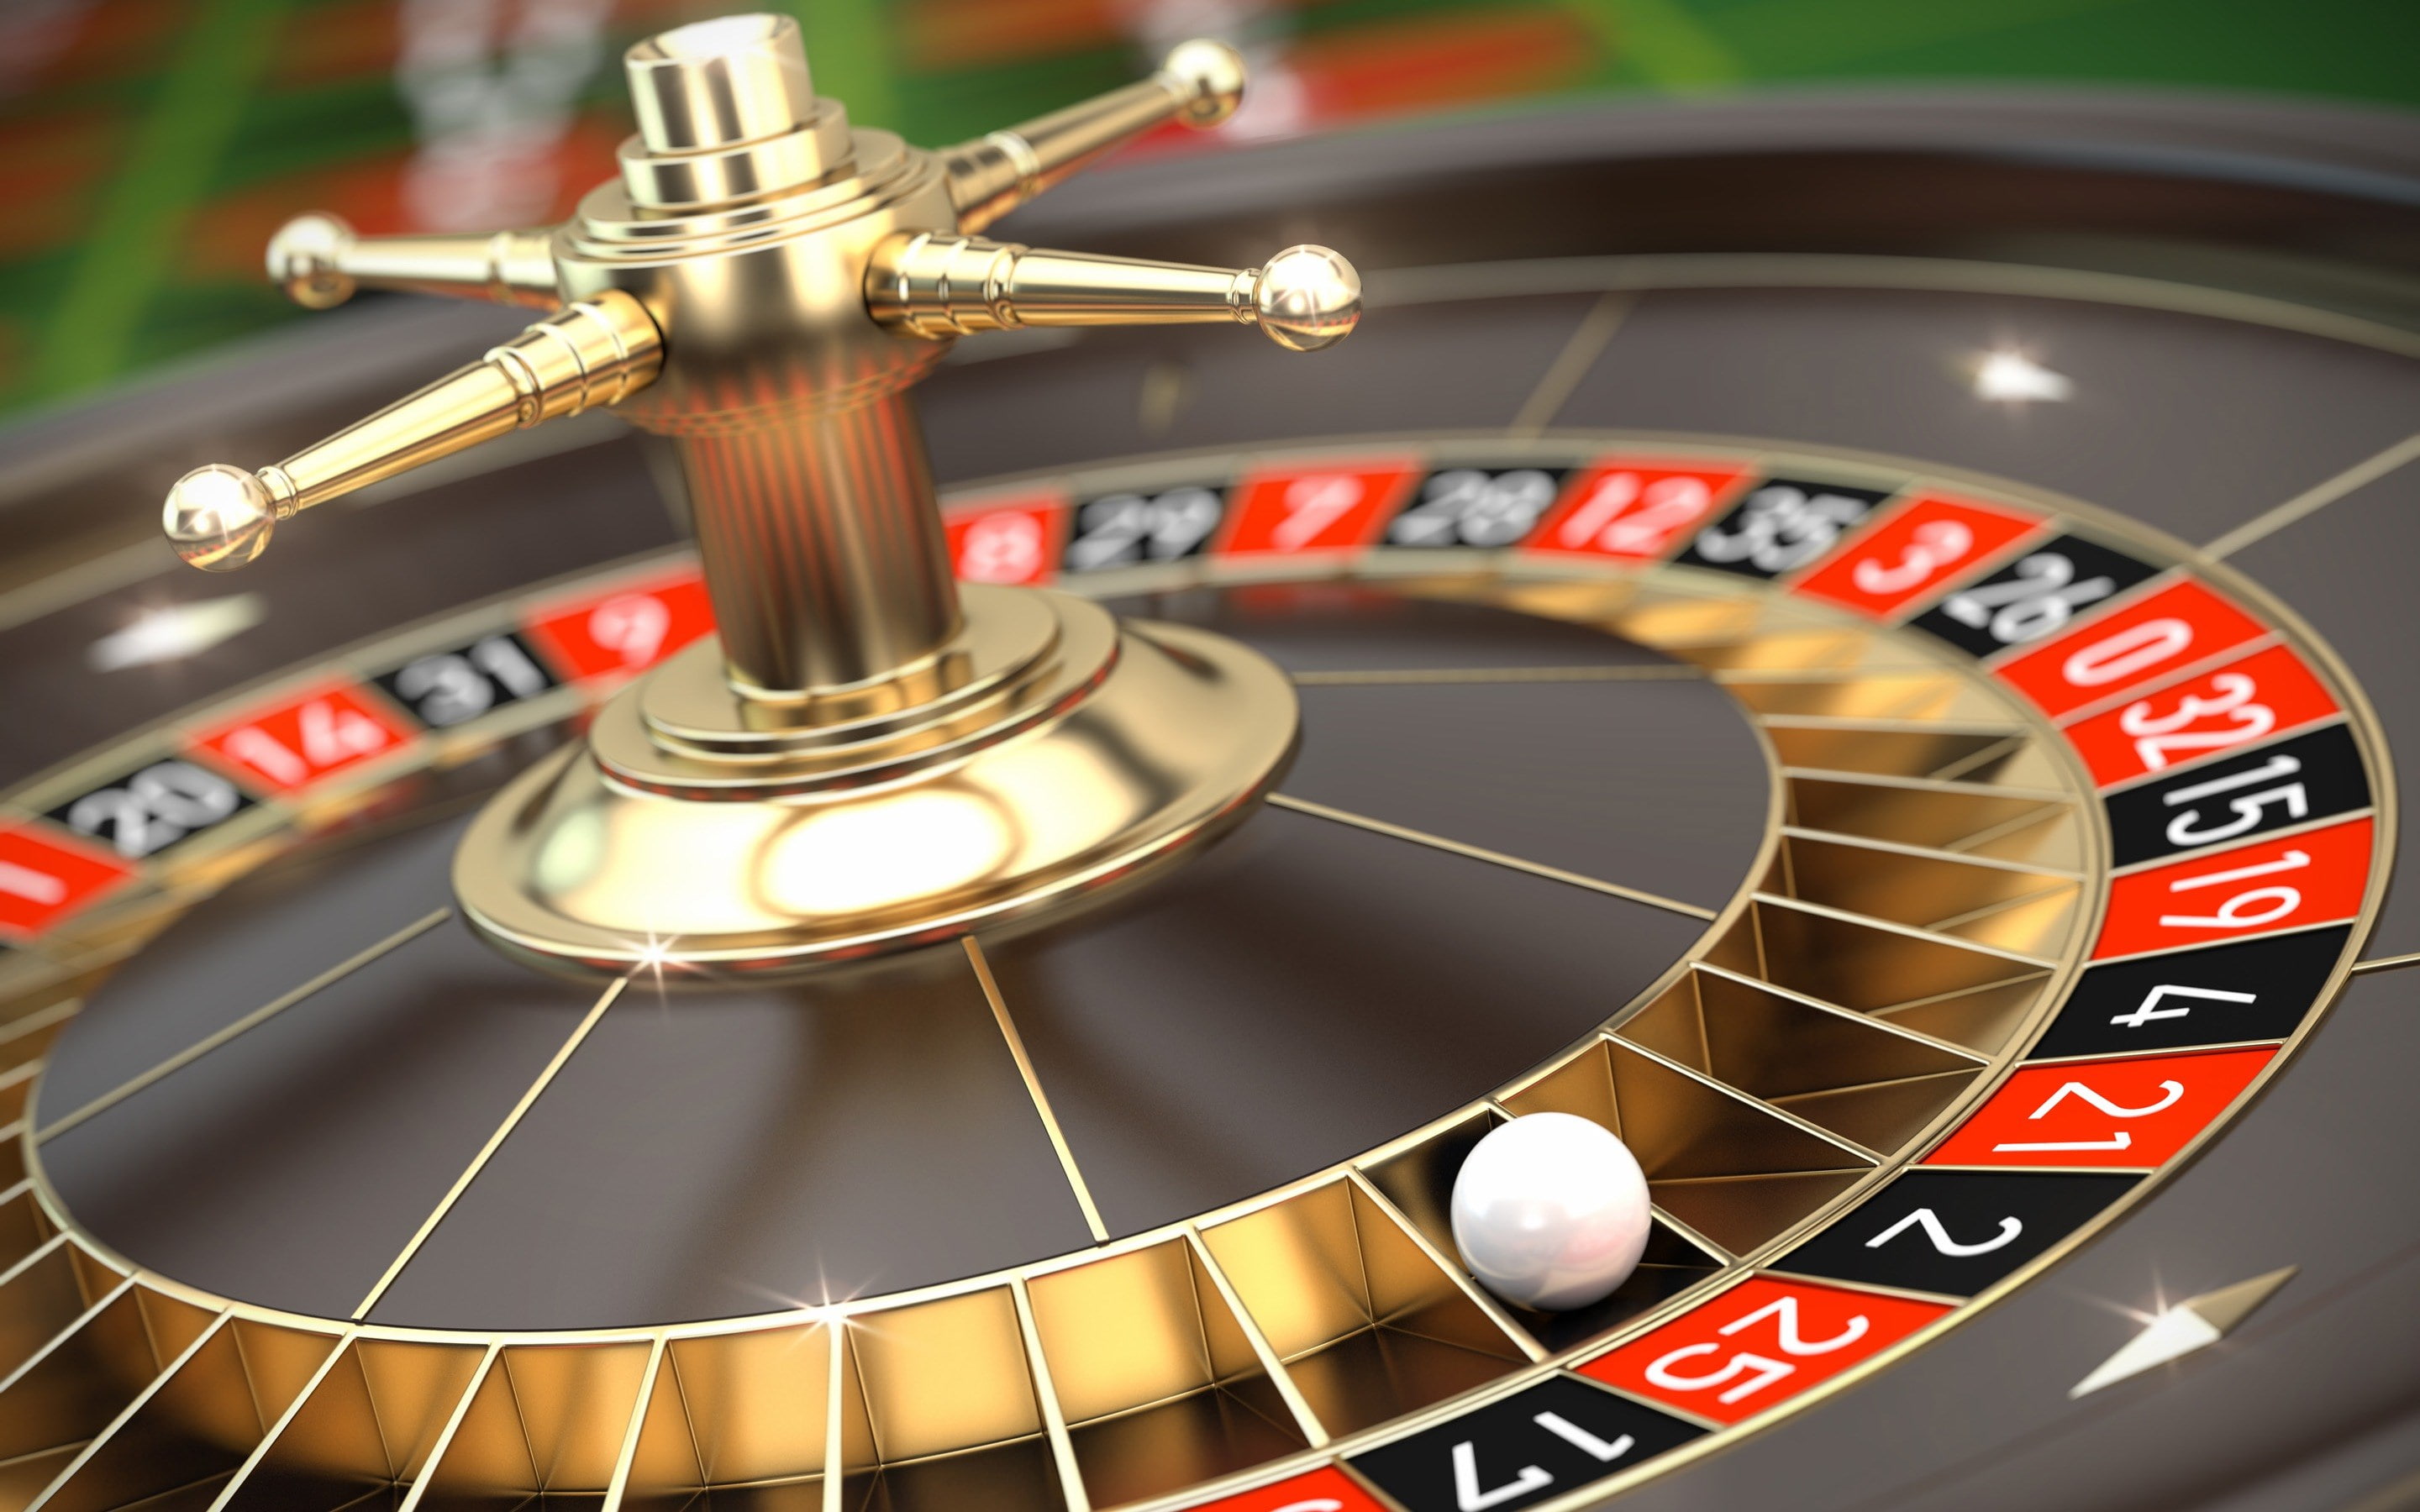 roulette, number, arts culture and entertainment, close-up